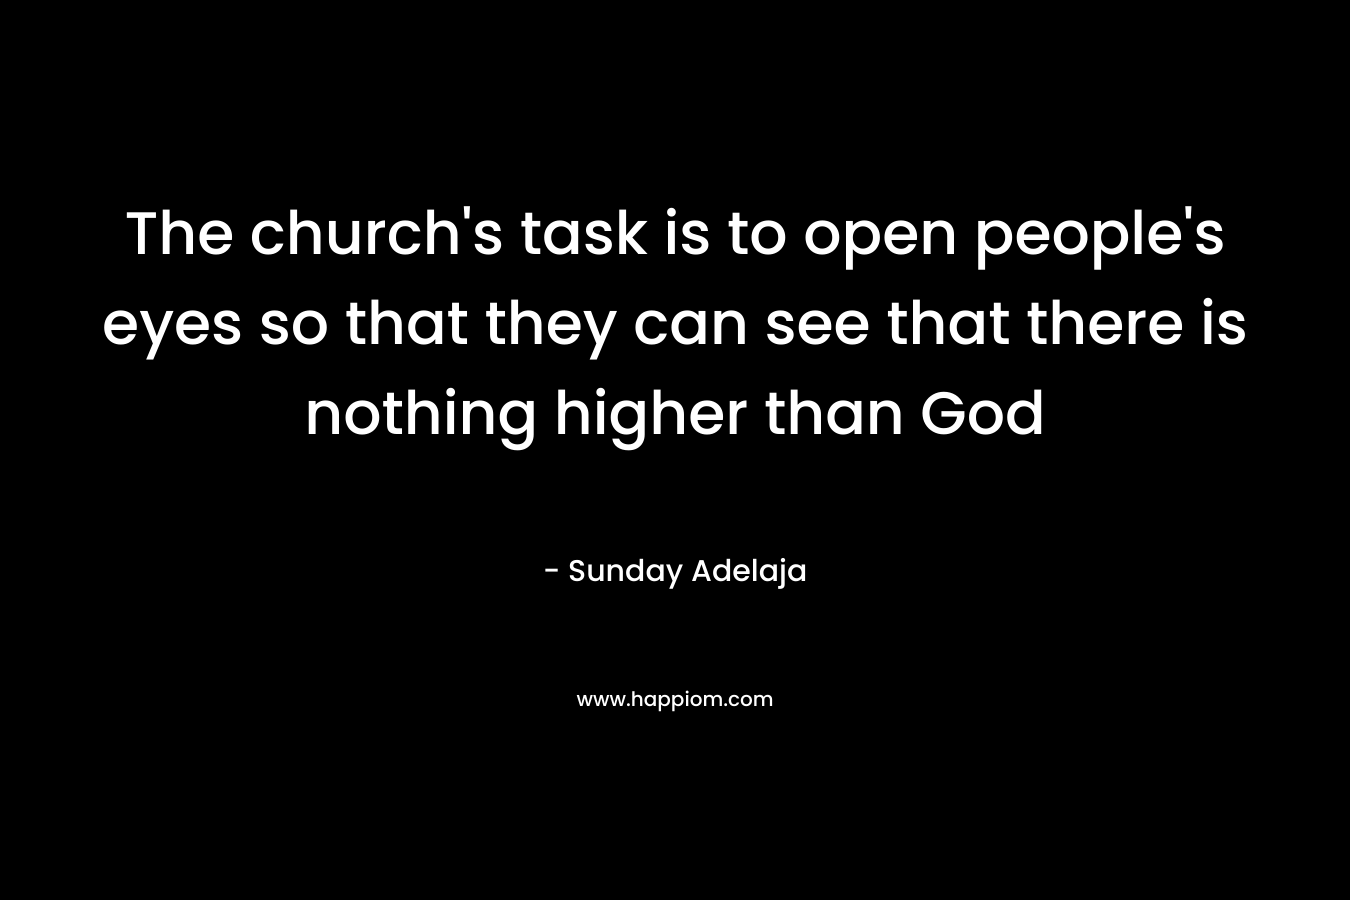 The church’s task is to open people’s eyes so that they can see that there is nothing higher than God – Sunday Adelaja